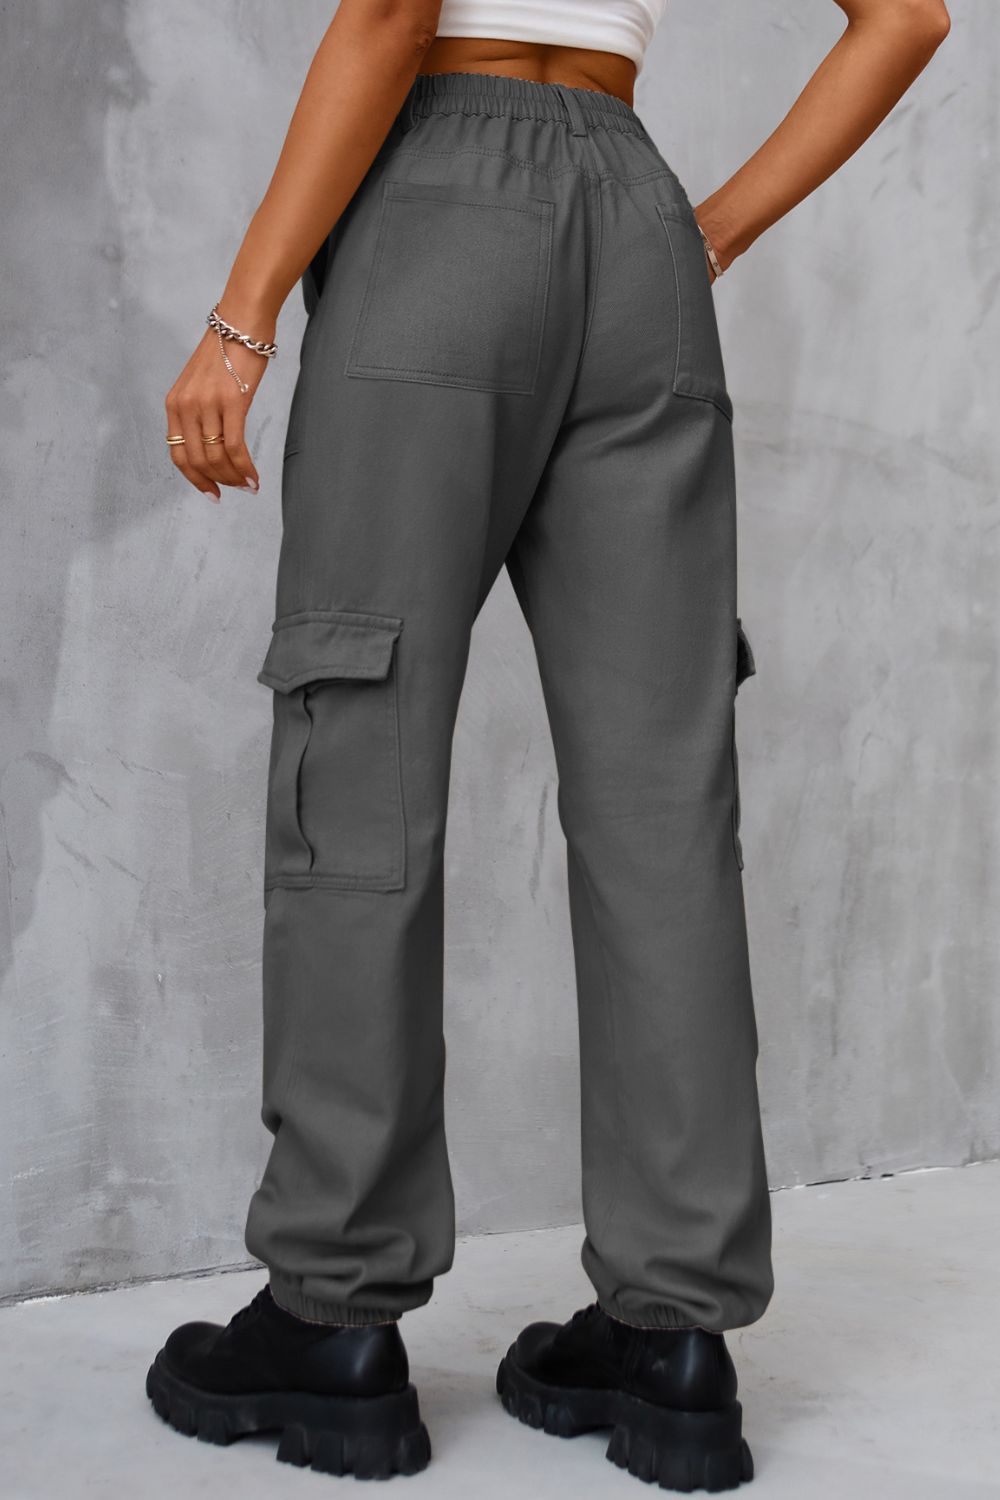 Light Slate Gray Buttoned High Waist Jeans with Pockets Sentient Beauty Fashions Apparel &amp; Accessories